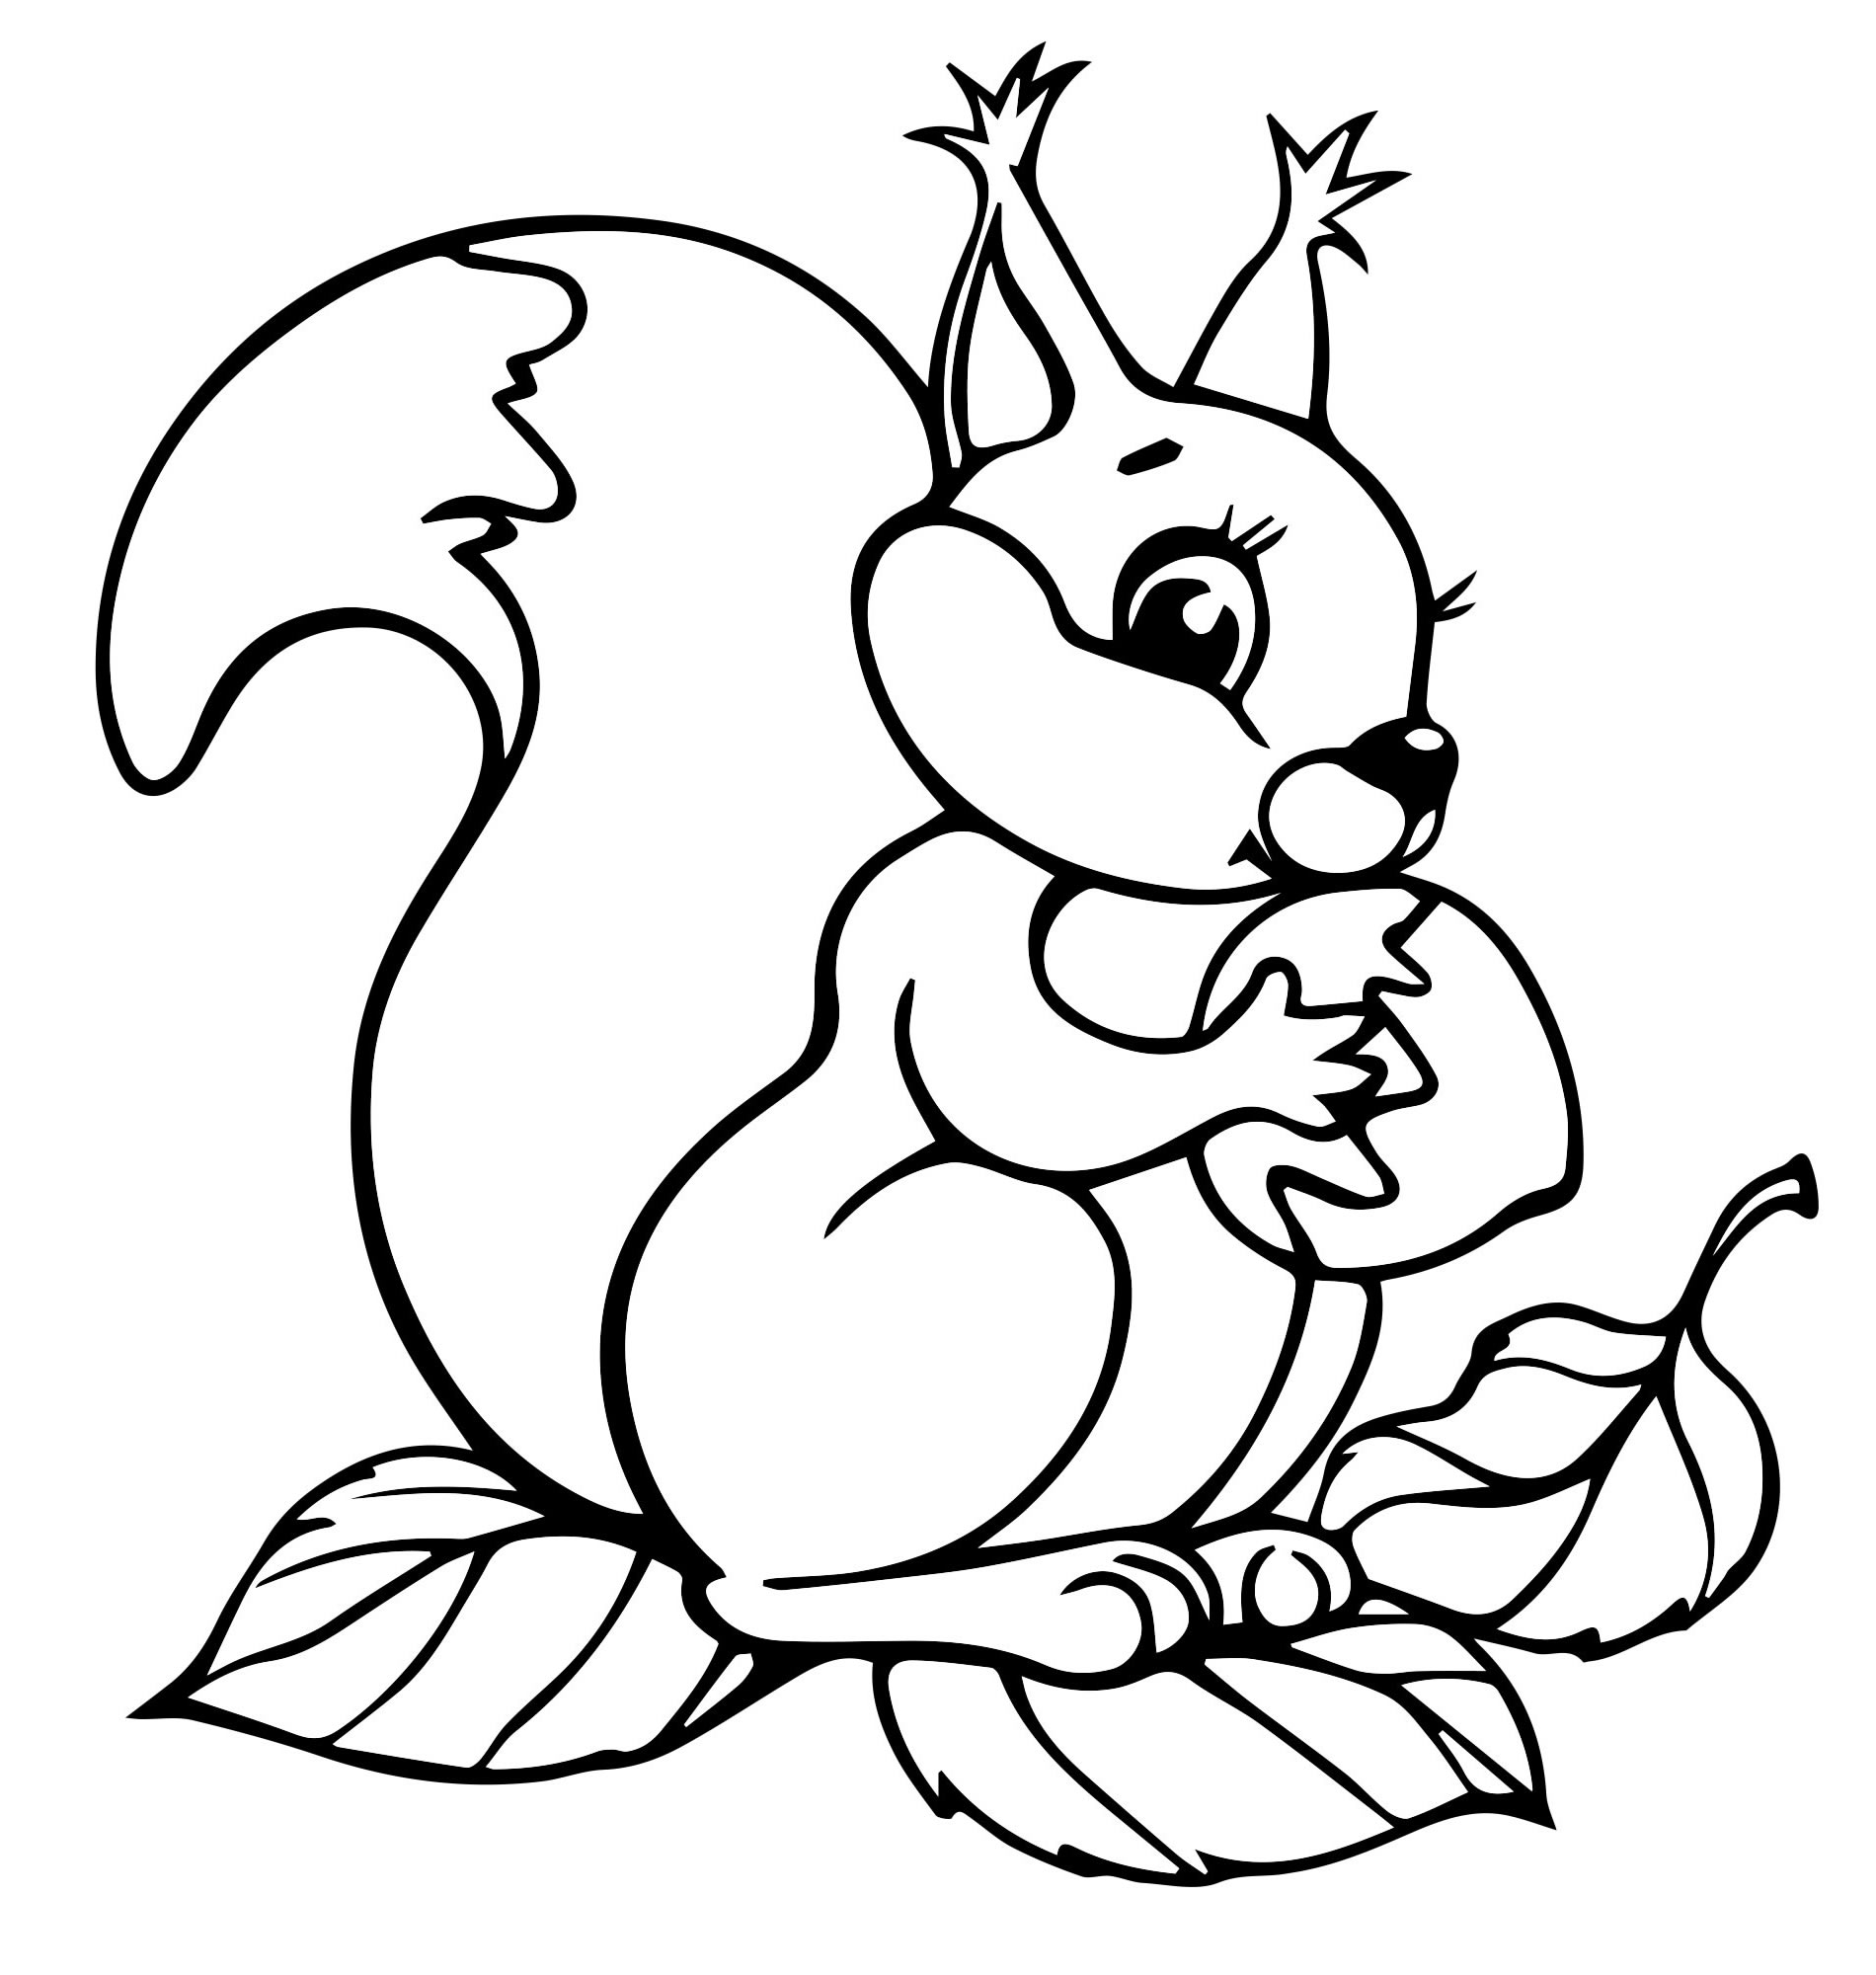 Picture for kids squirrel #5